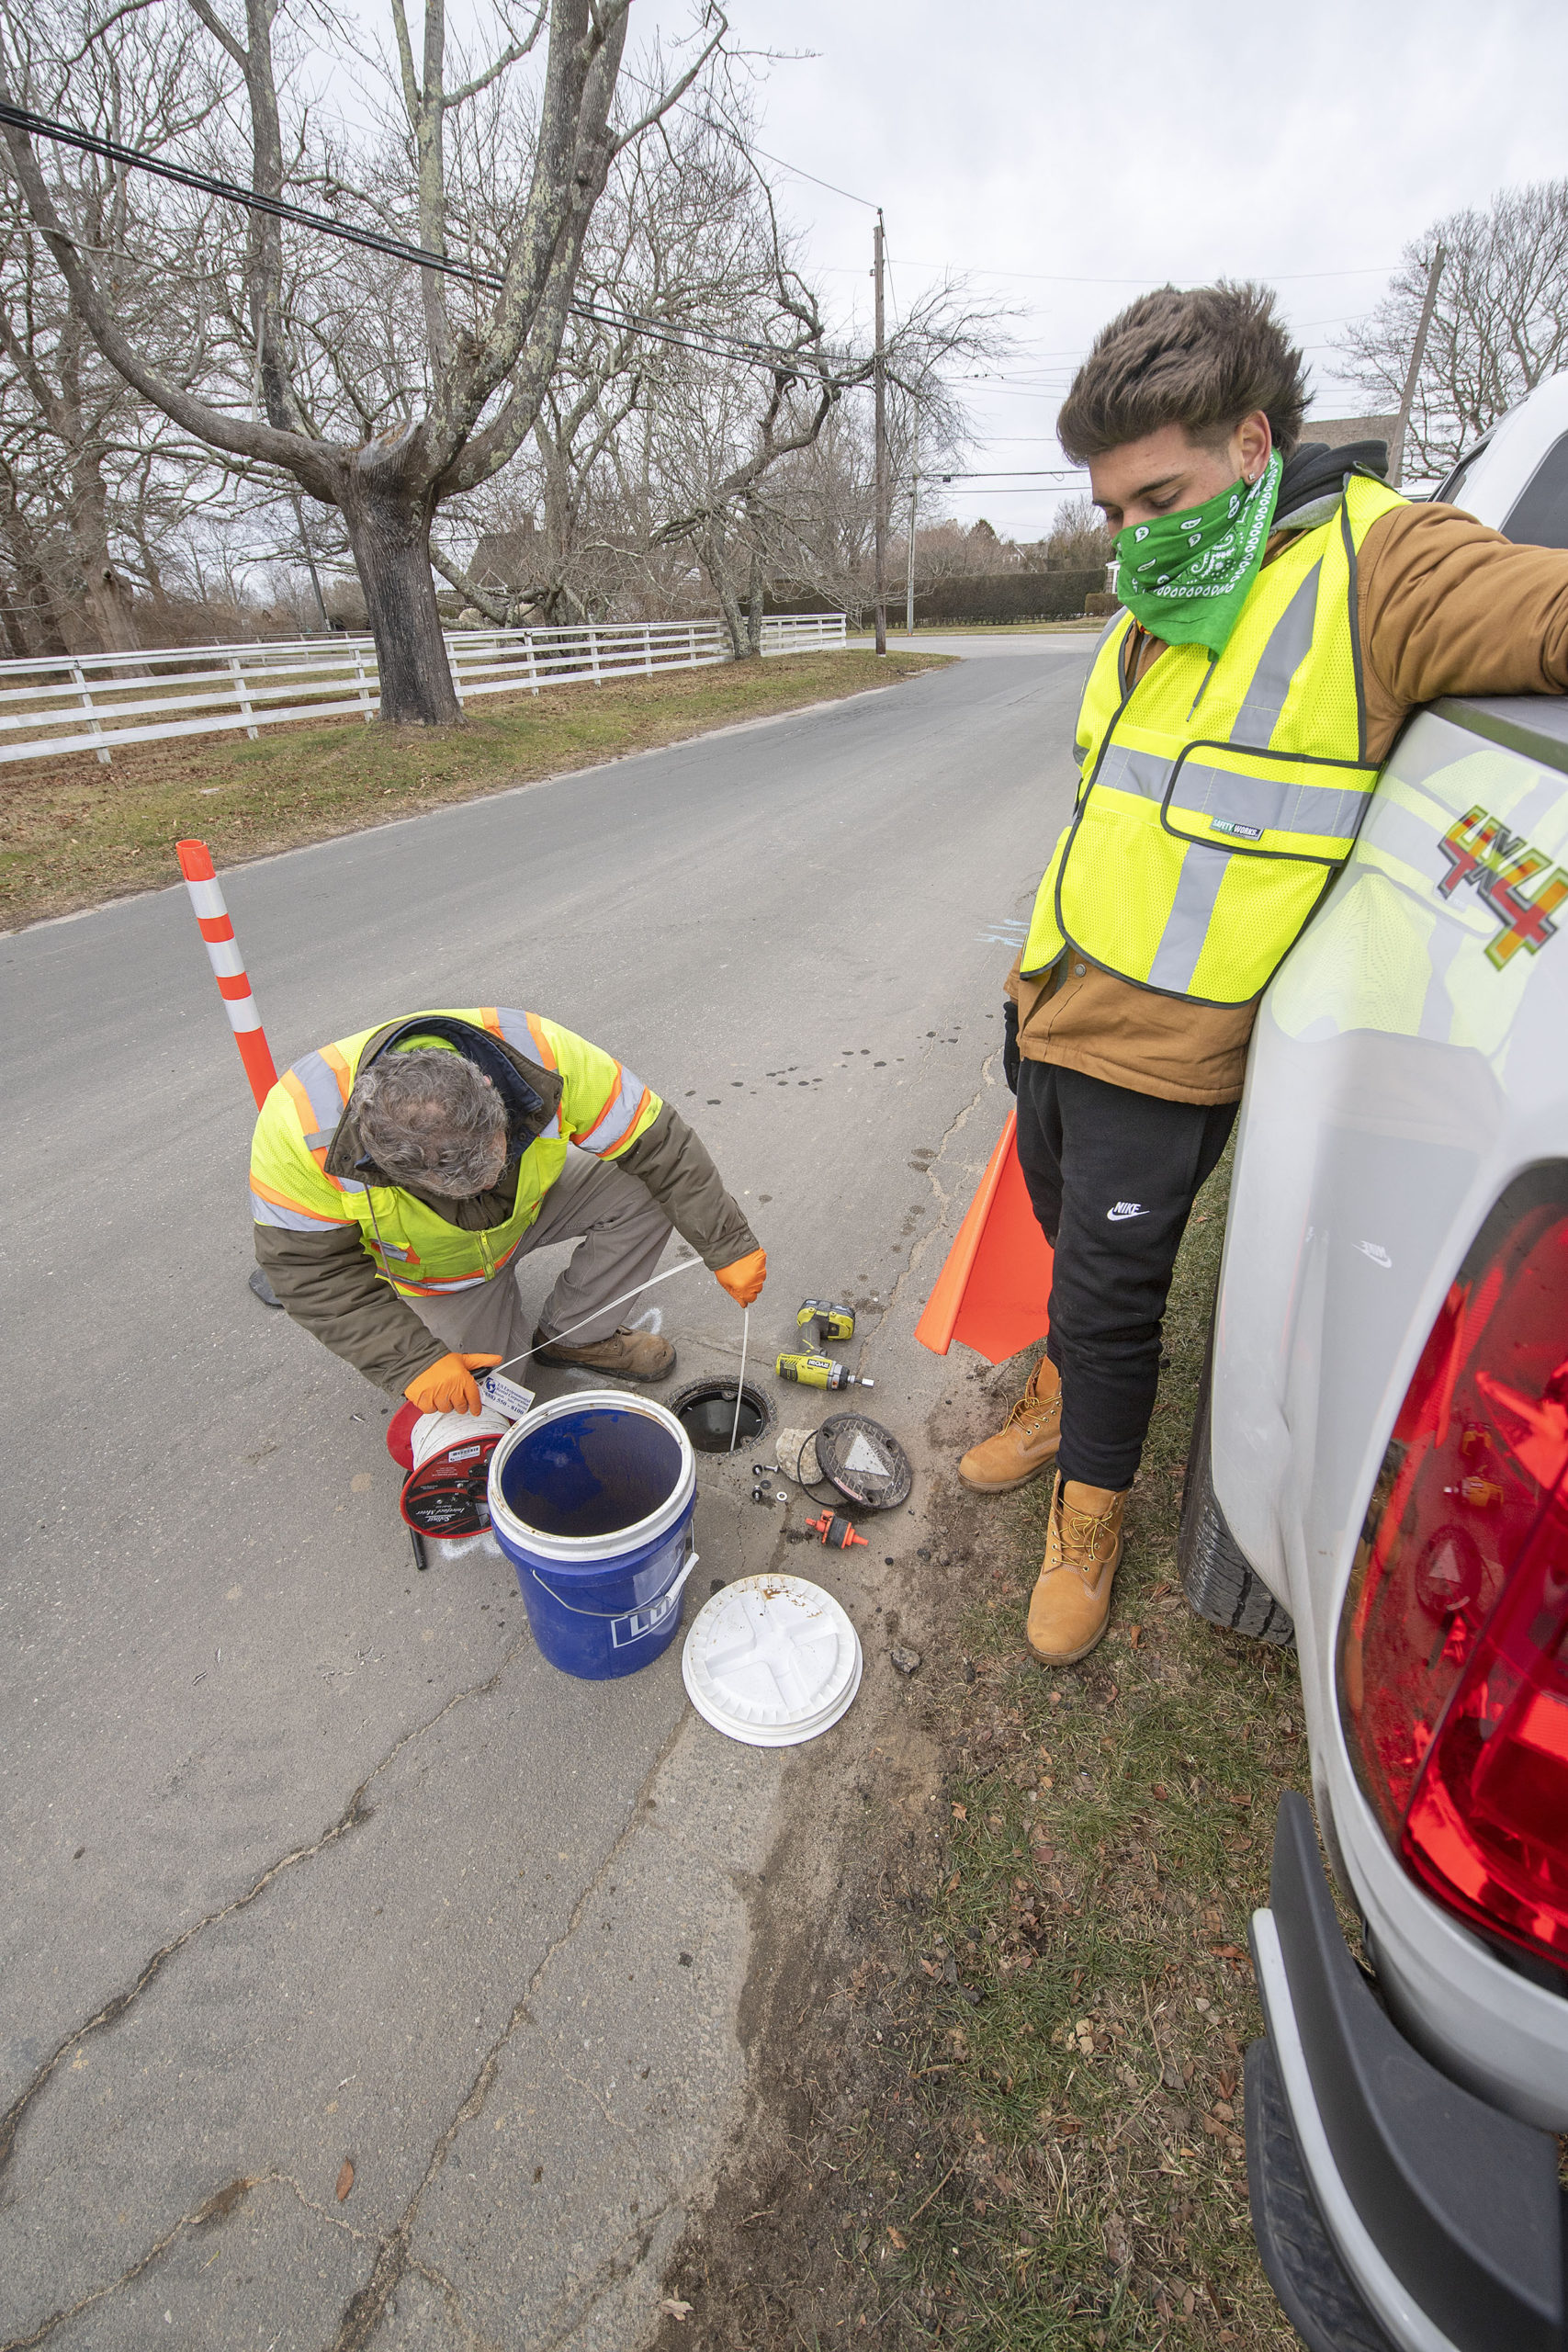 Contractors for the wind farm developers have already begun testing the water and soil beneath town roadways in Wainscott.